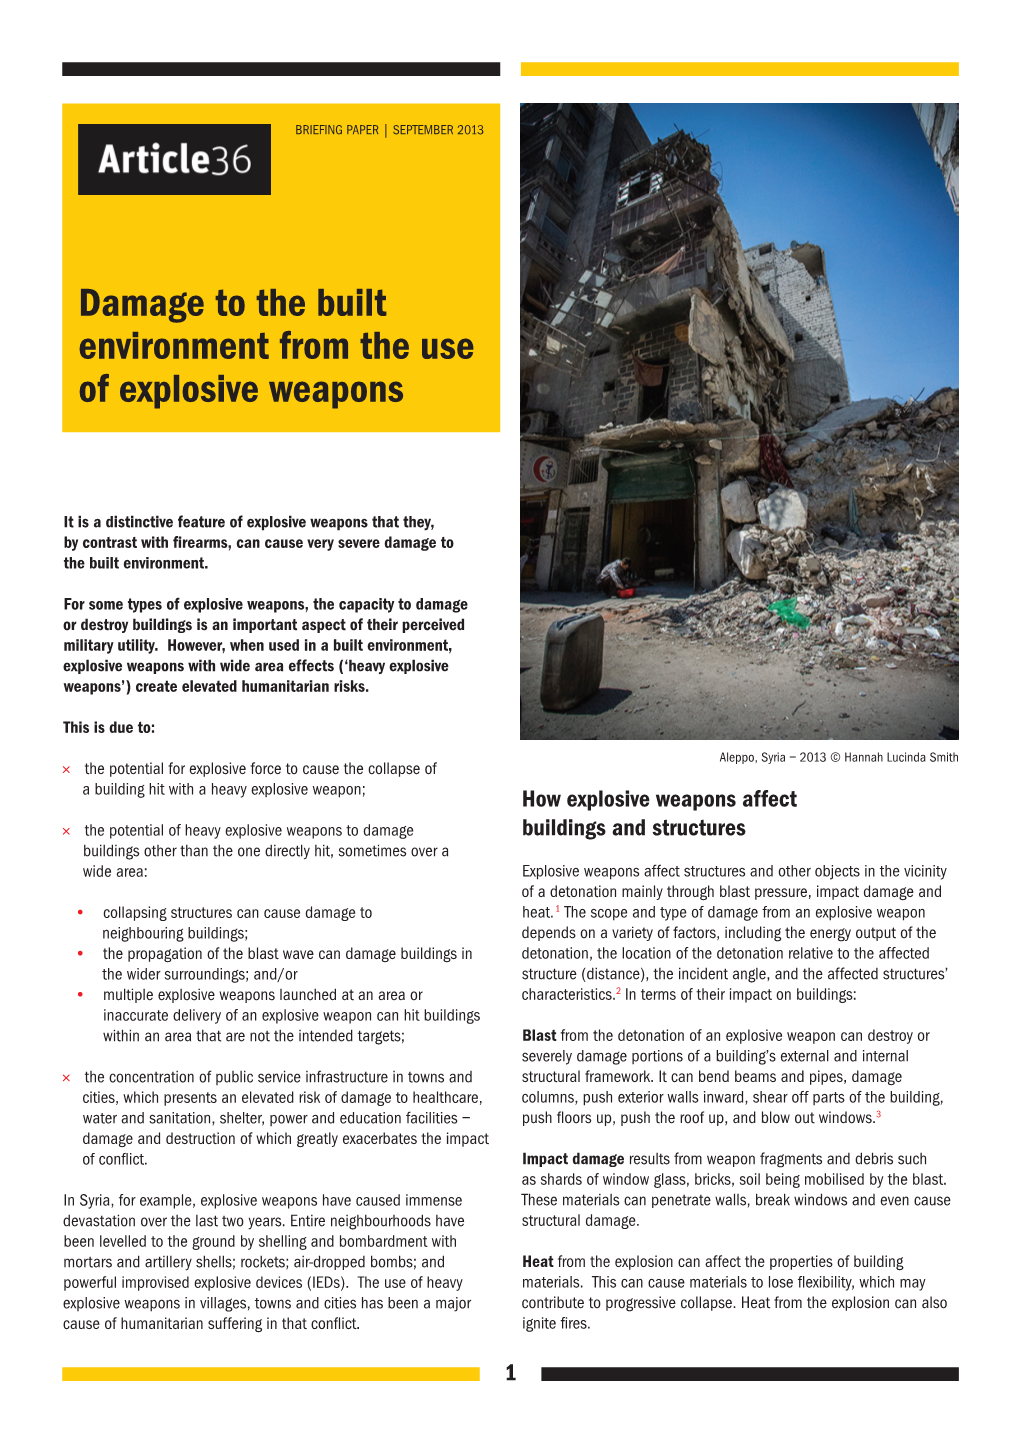 Damage to the Built Environment from the Use of Explosive Weapons